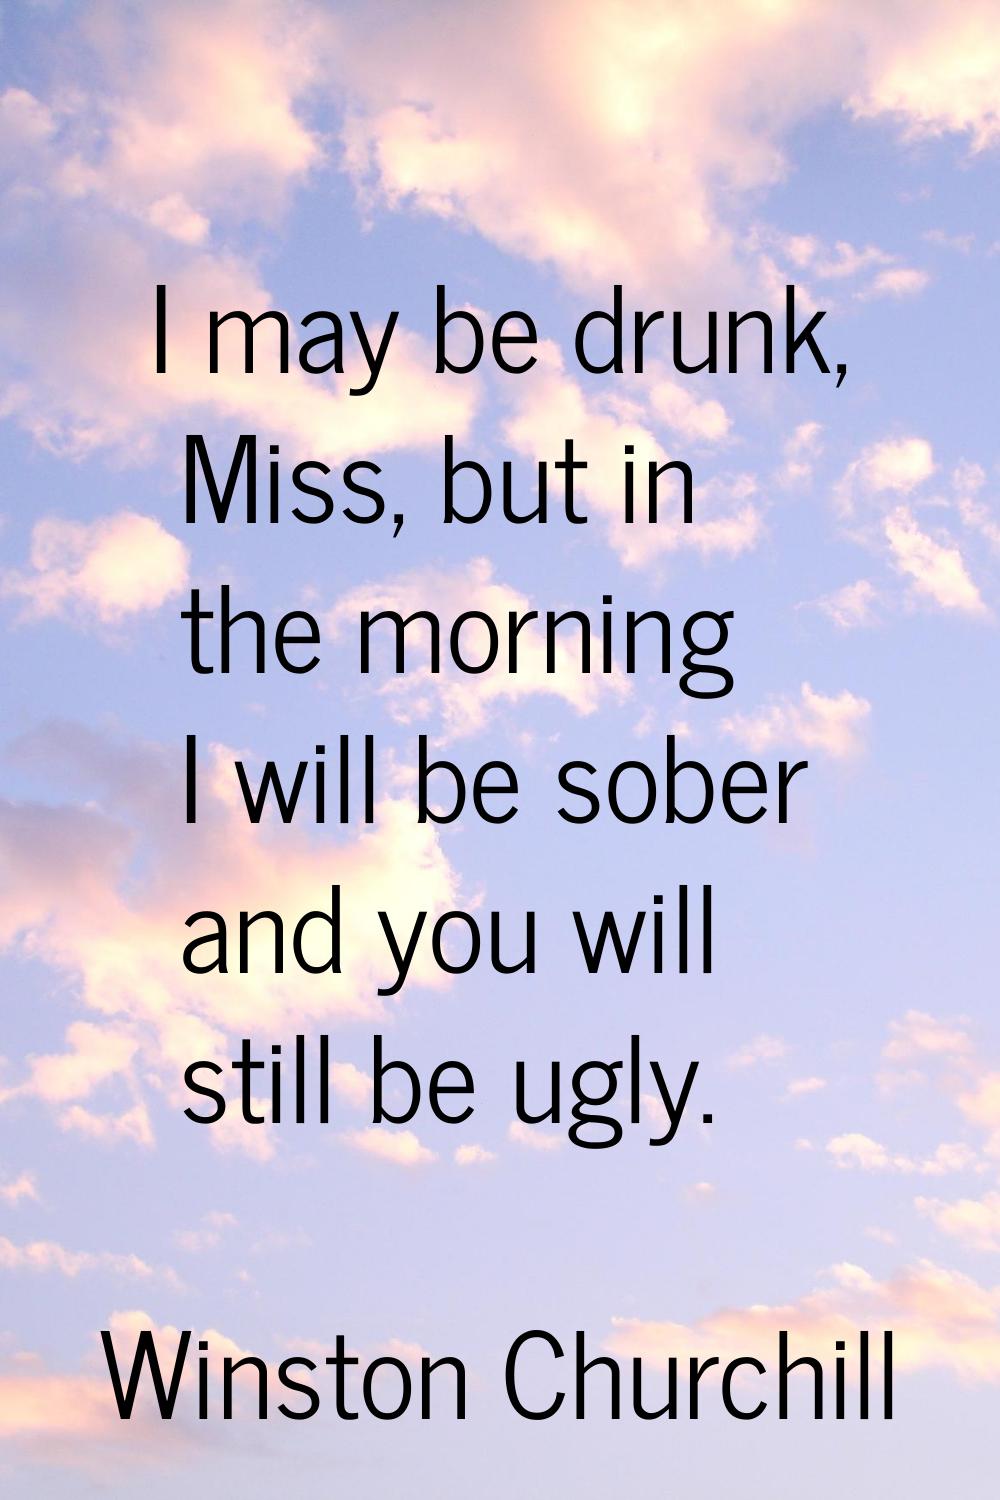 I may be drunk, Miss, but in the morning I will be sober and you will still be ugly.